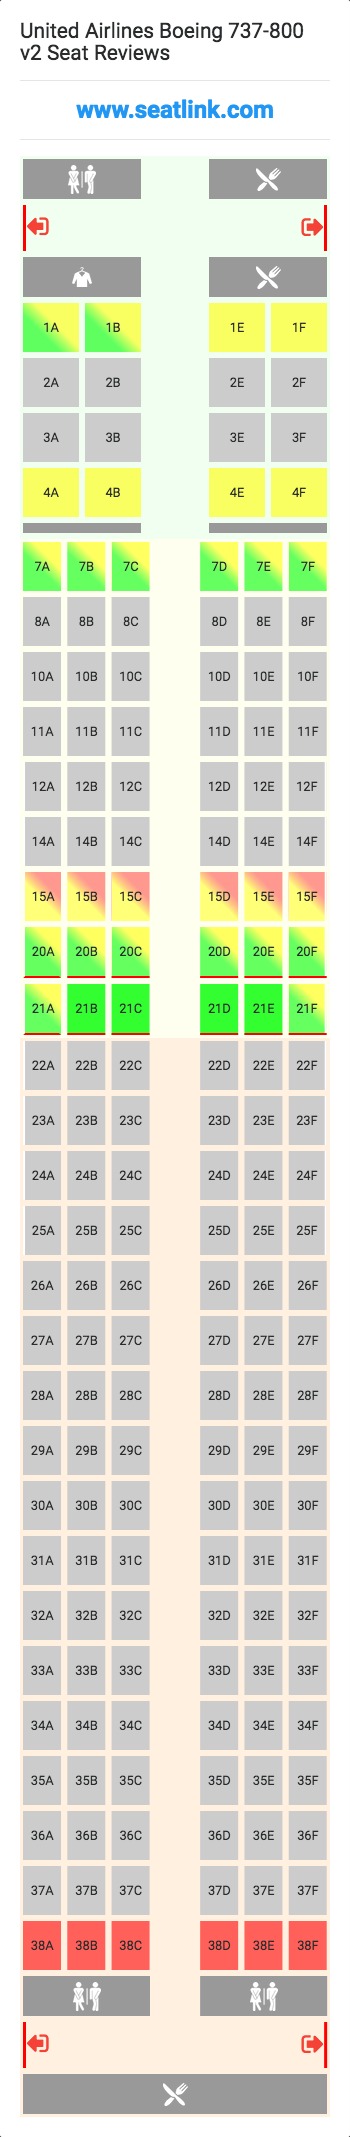 United Airlines Boeing 737-800 v2 (738) Seat Map